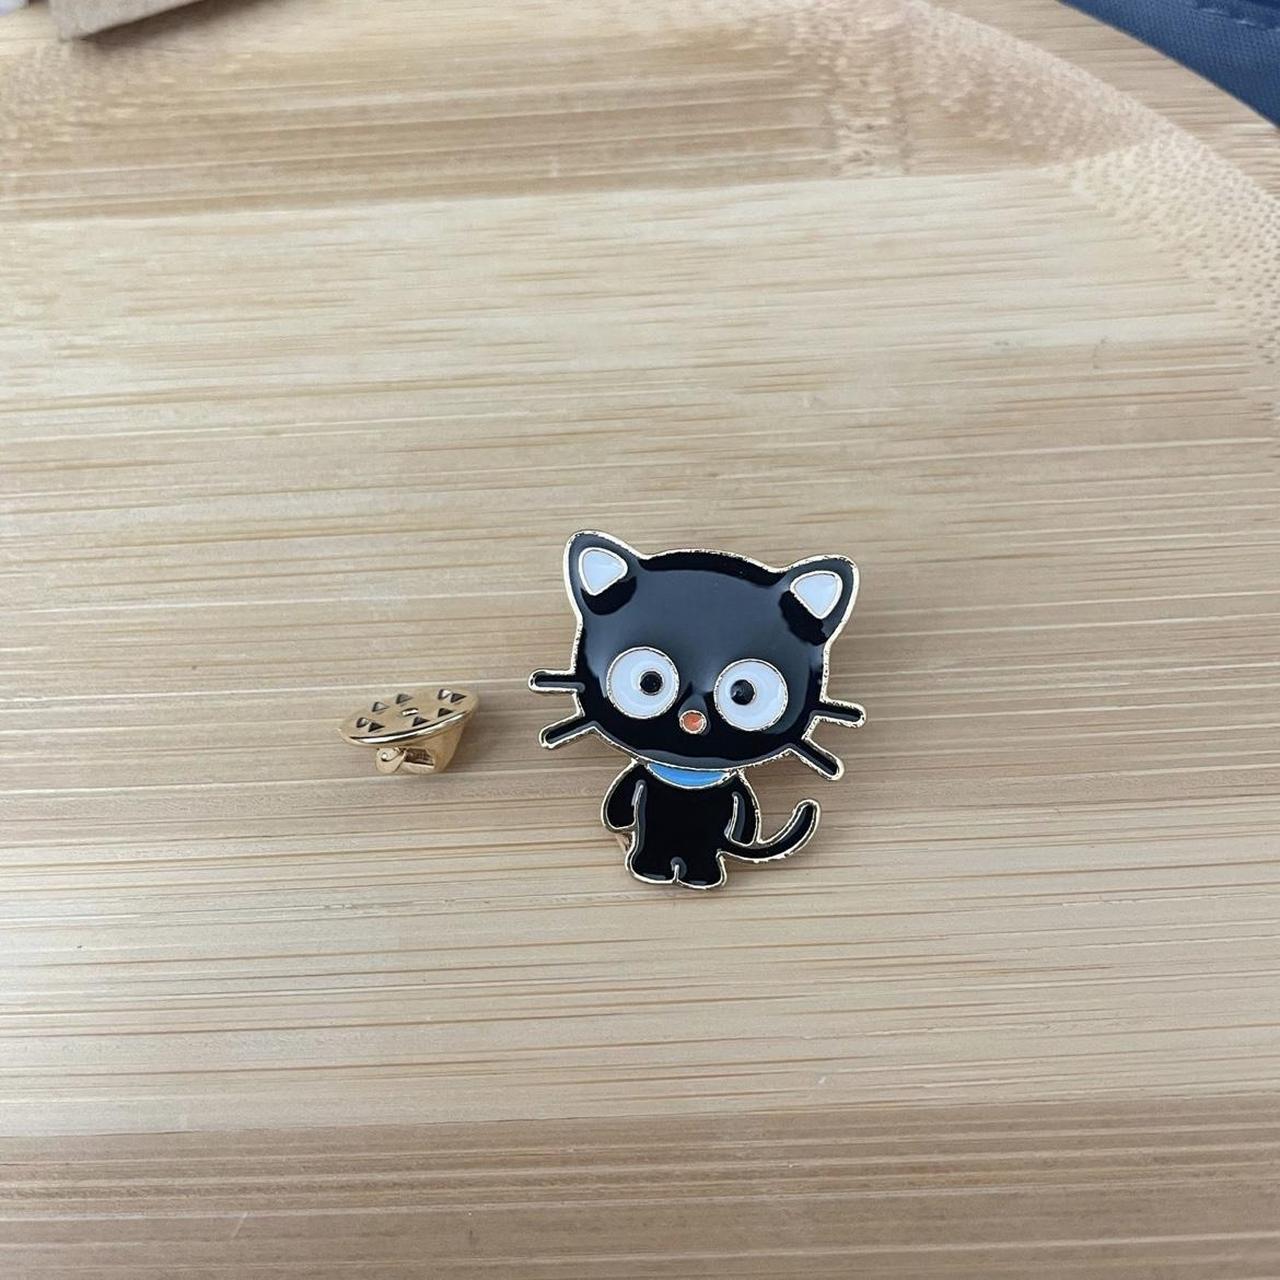 This is a set of 10 chococat invitation cards which - Depop